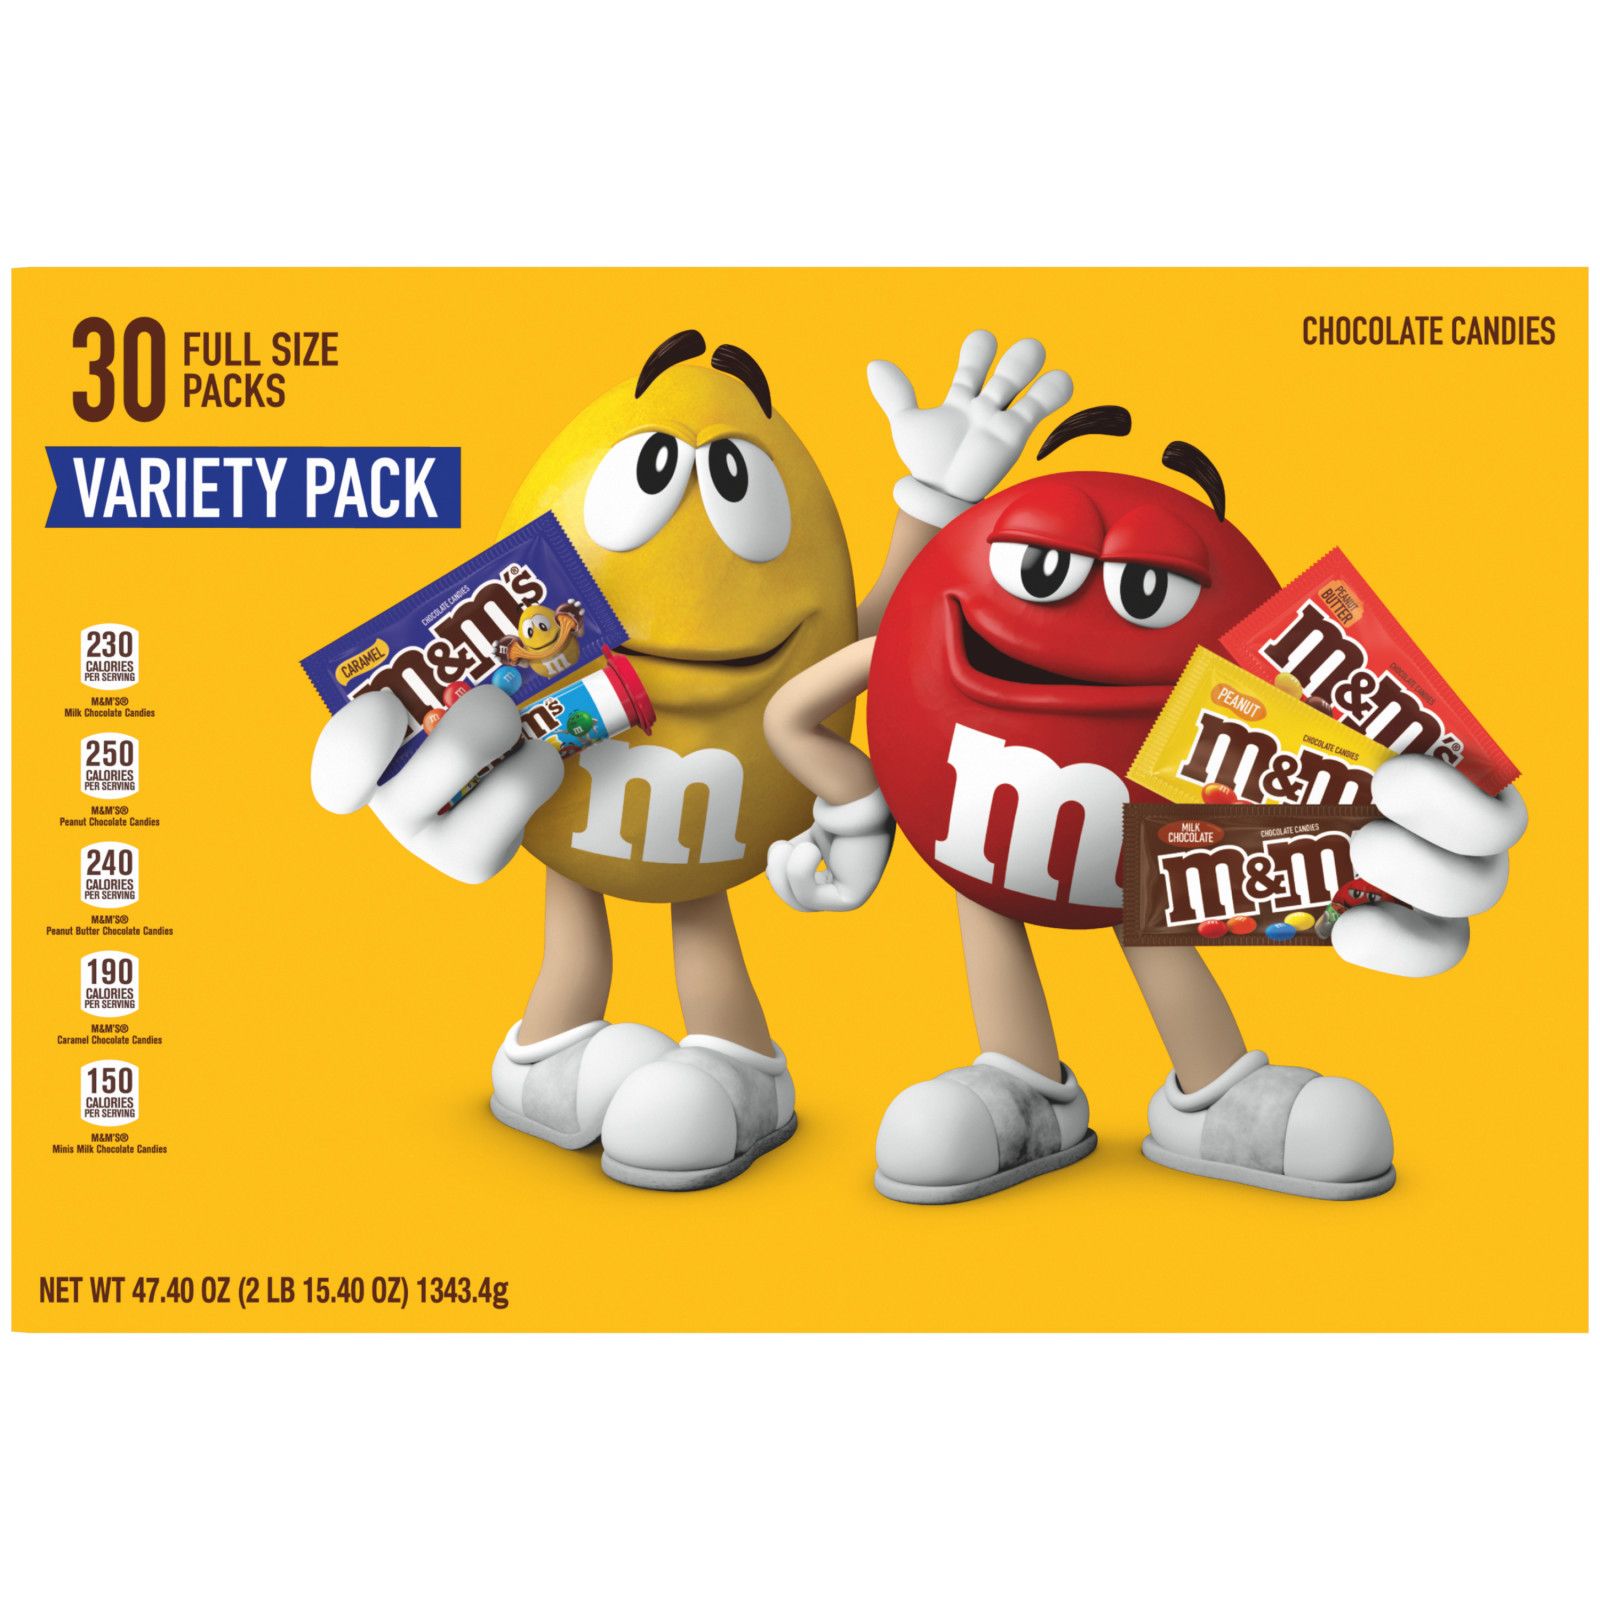 Buy M&Ms Ultimate Variety Mega Sack 9 Count Featuring Almond